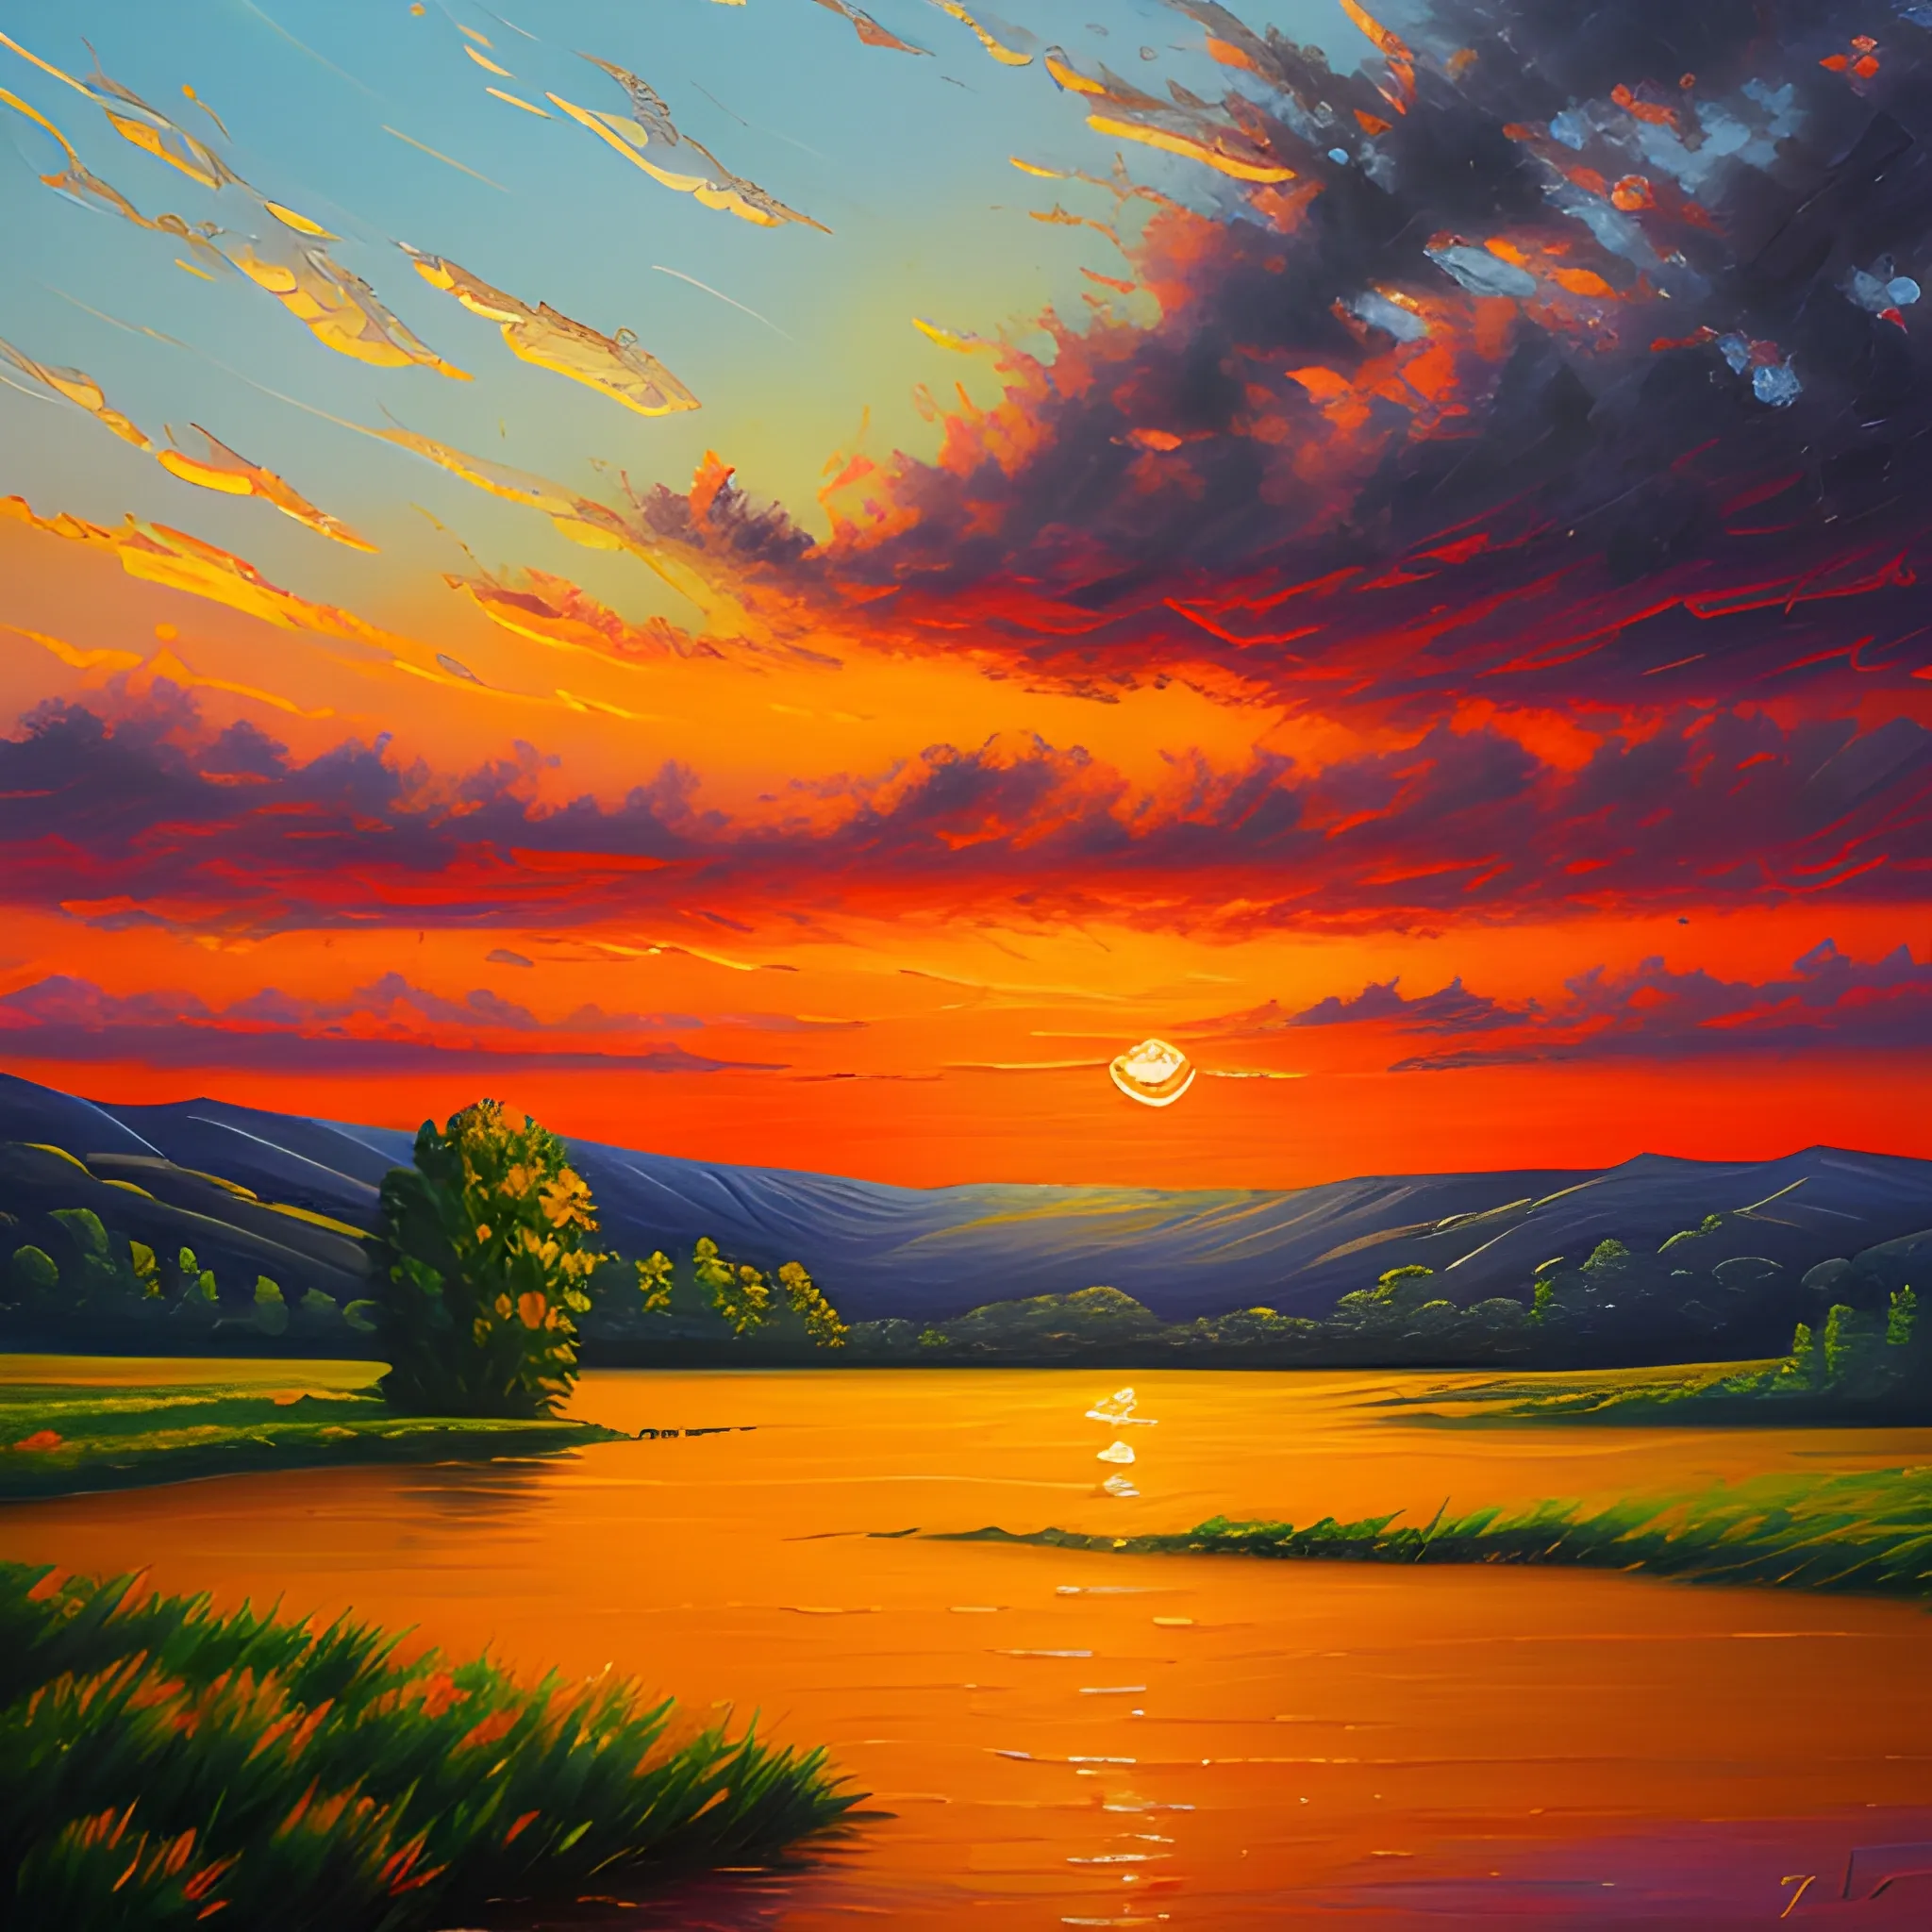 Sunset landscape painting, oil painting style